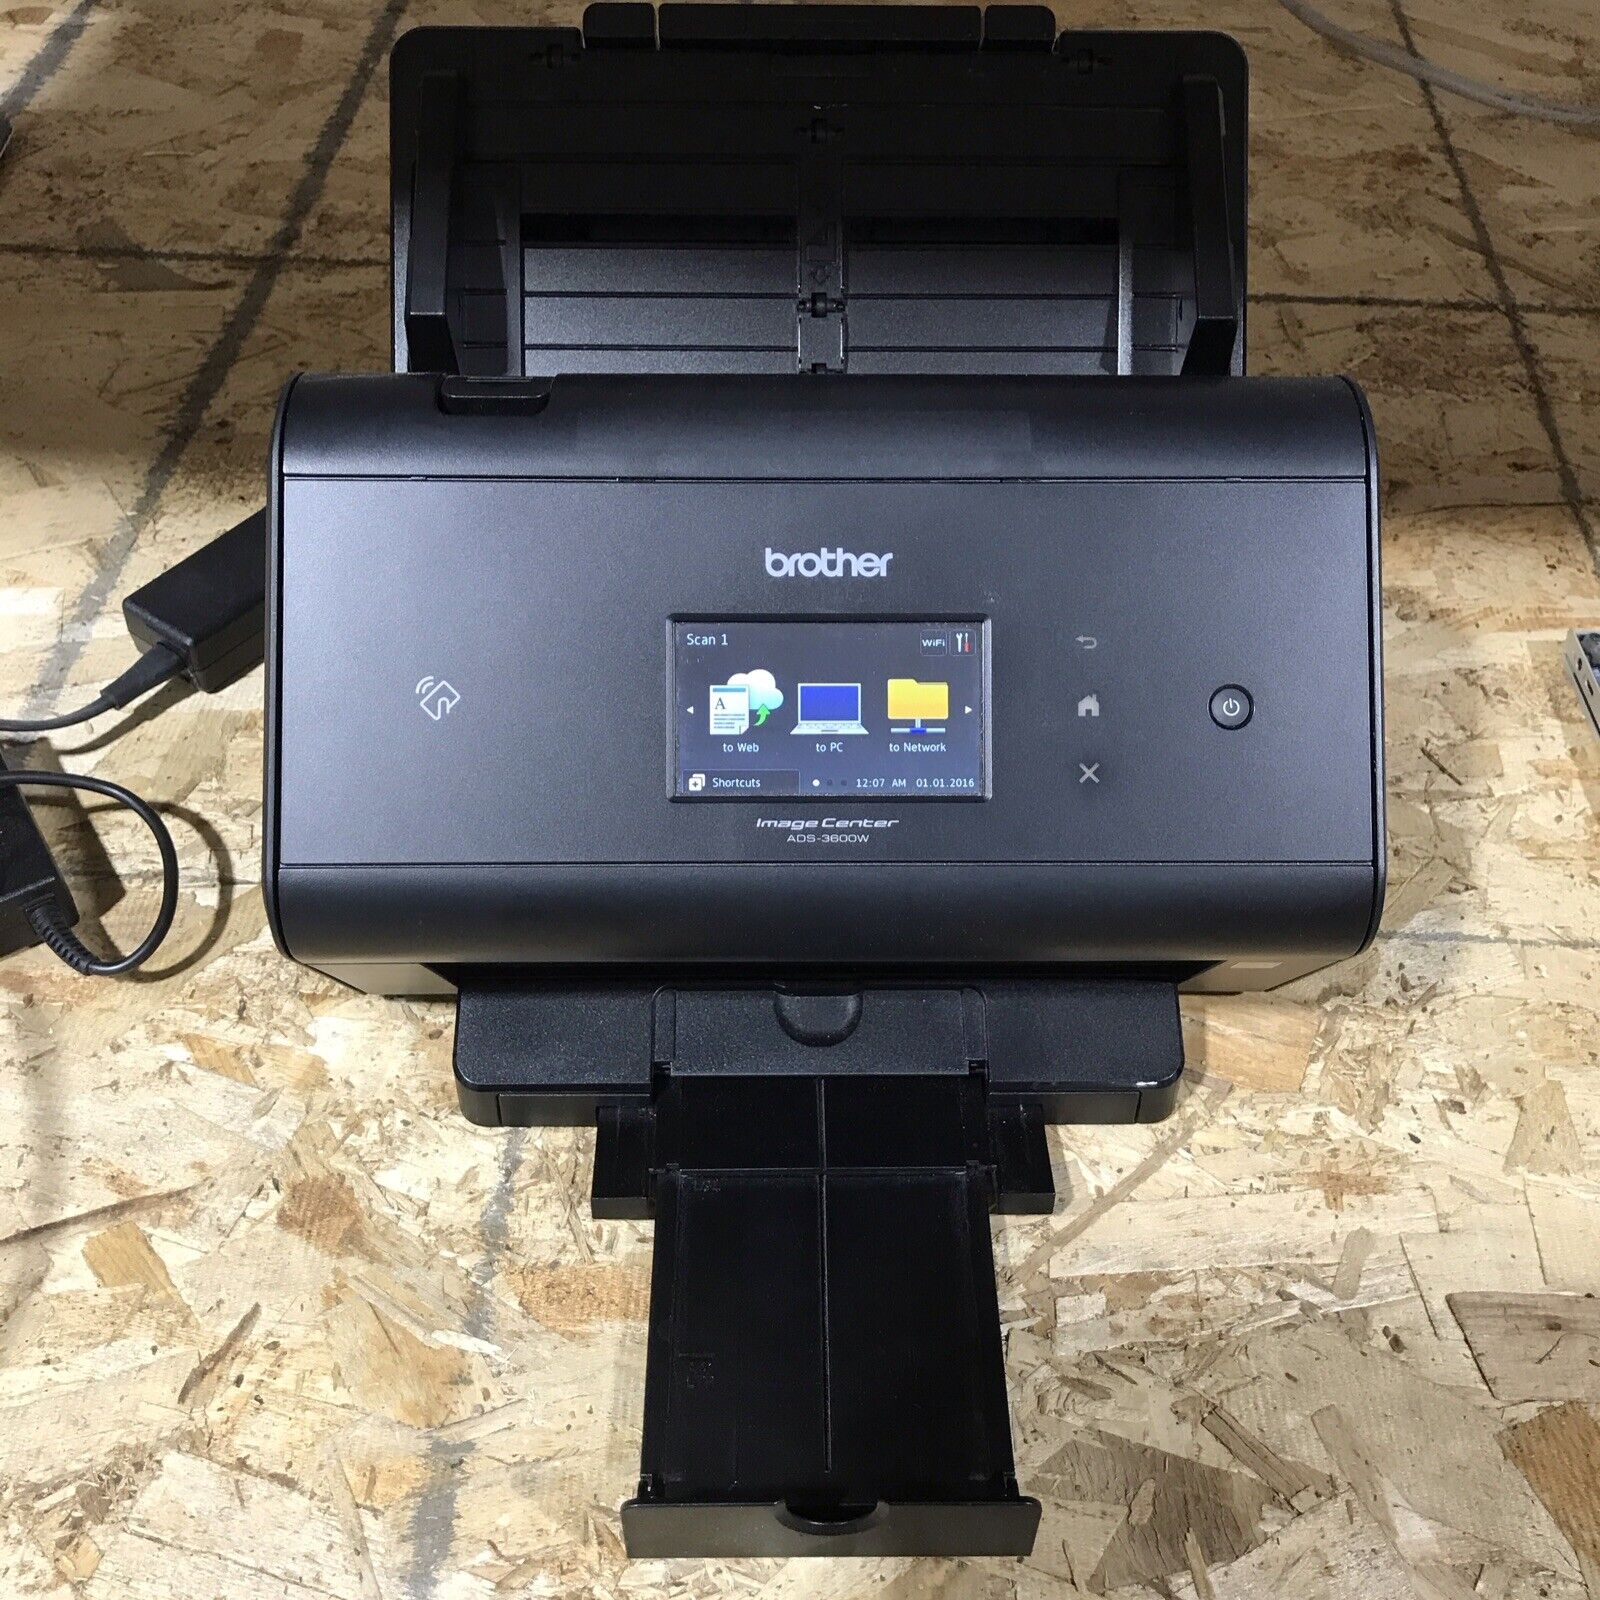 Brother ADS-3600W Image Center High Speed Desktop Document Scanner w/ AC Adapter